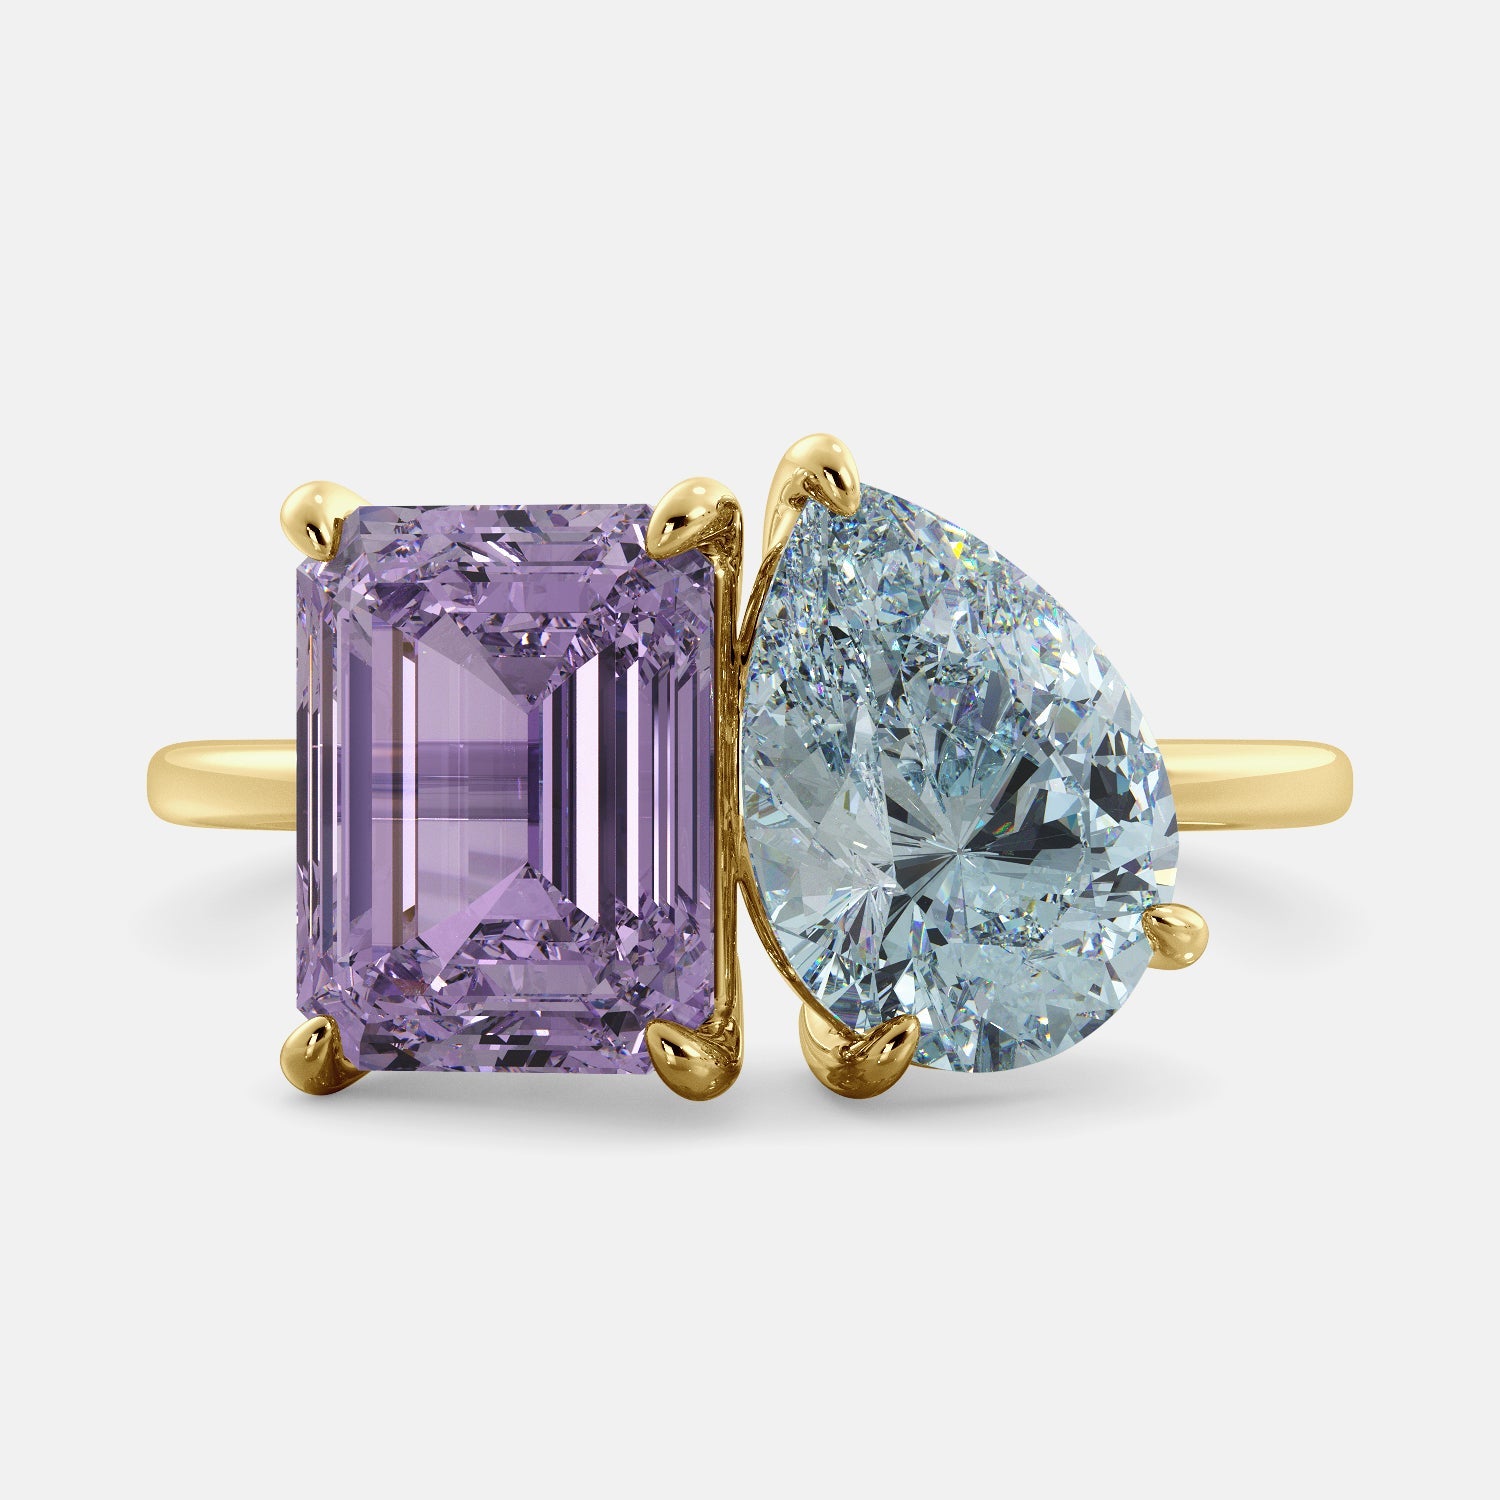 A toi et moi ring with a pear-shaped aquamarine and an emerald-cut amethyst. The ring is set in a 14k yellow gold band and is available in all sizes. The aquamarine is a blue gemstone that is said to promote spiritual growth and strengthen self-confidence. The amethyst is a purple gemstone that is said to promote peace, love, and harmony. The toi et moi ring is a beautiful and unique way to show your love and commitment to someone special.